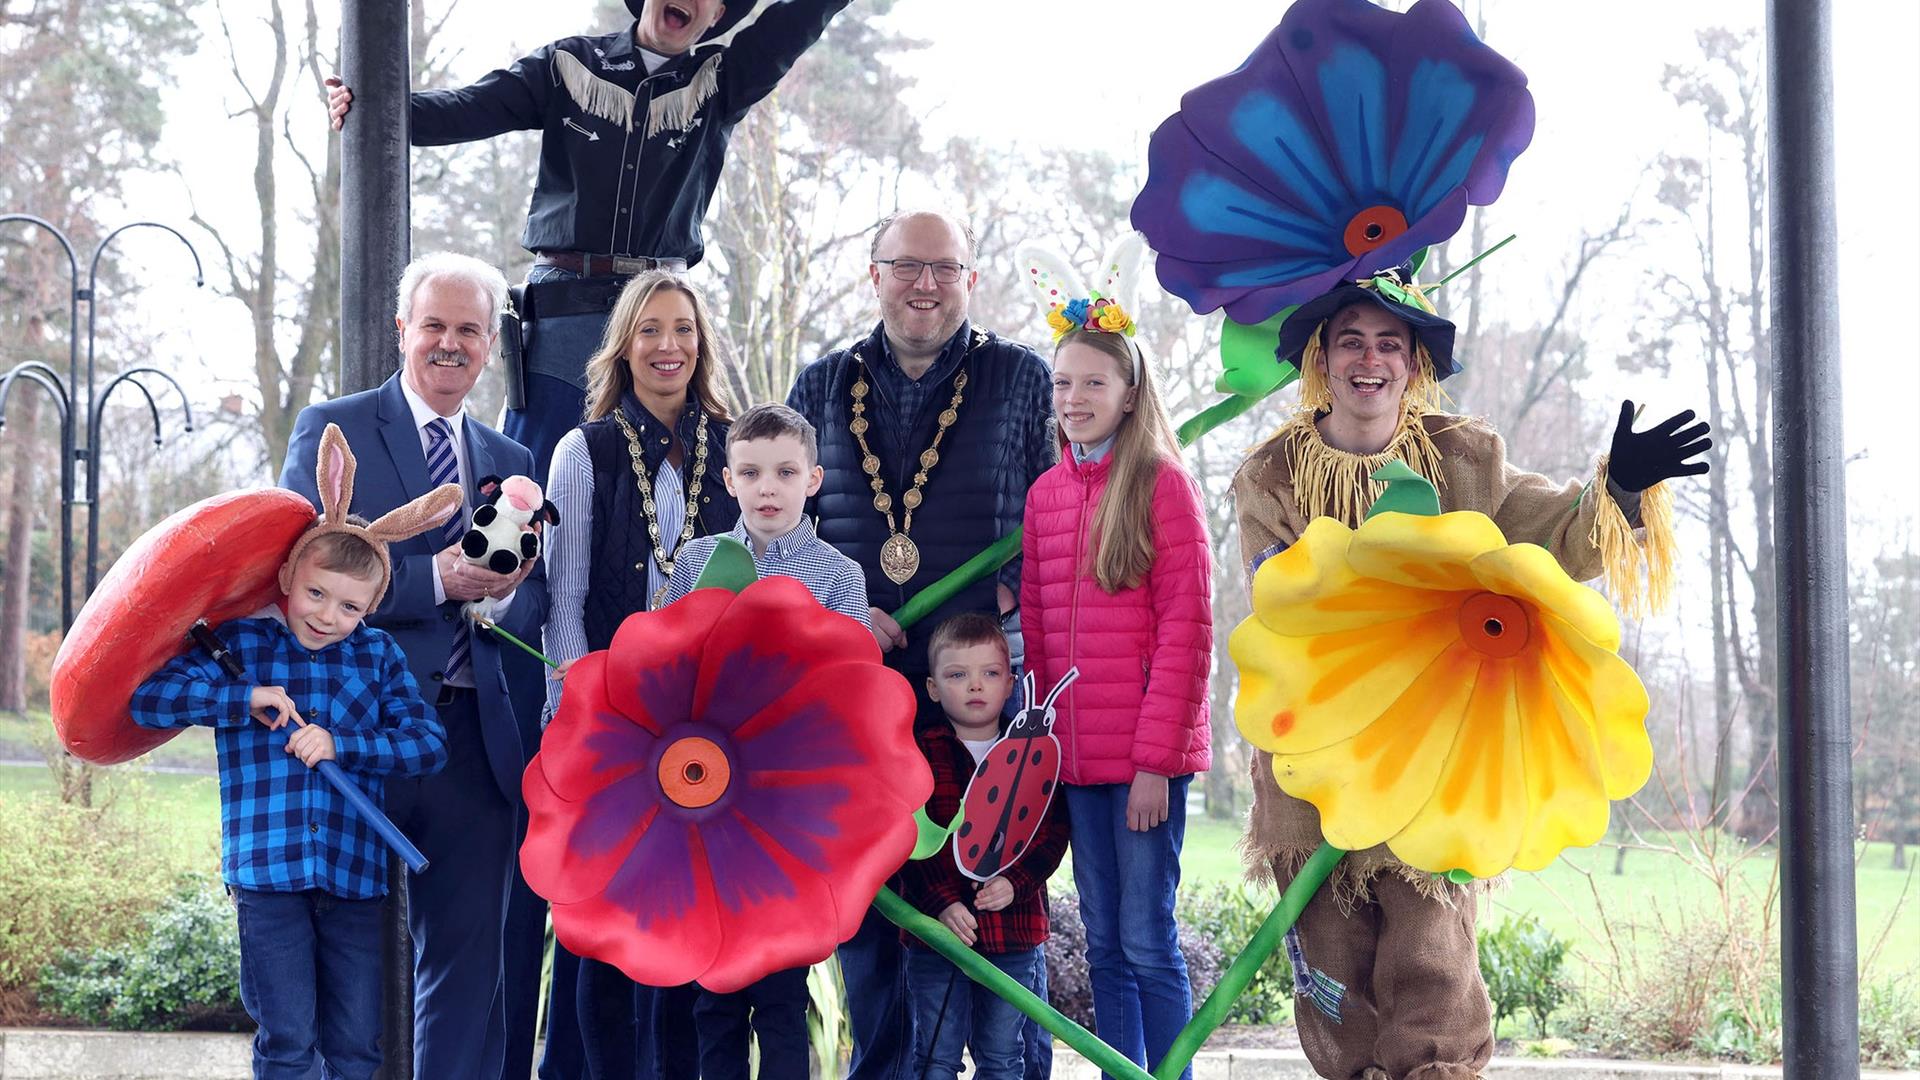 Mayor of Lisburn with his family and characters dressed up